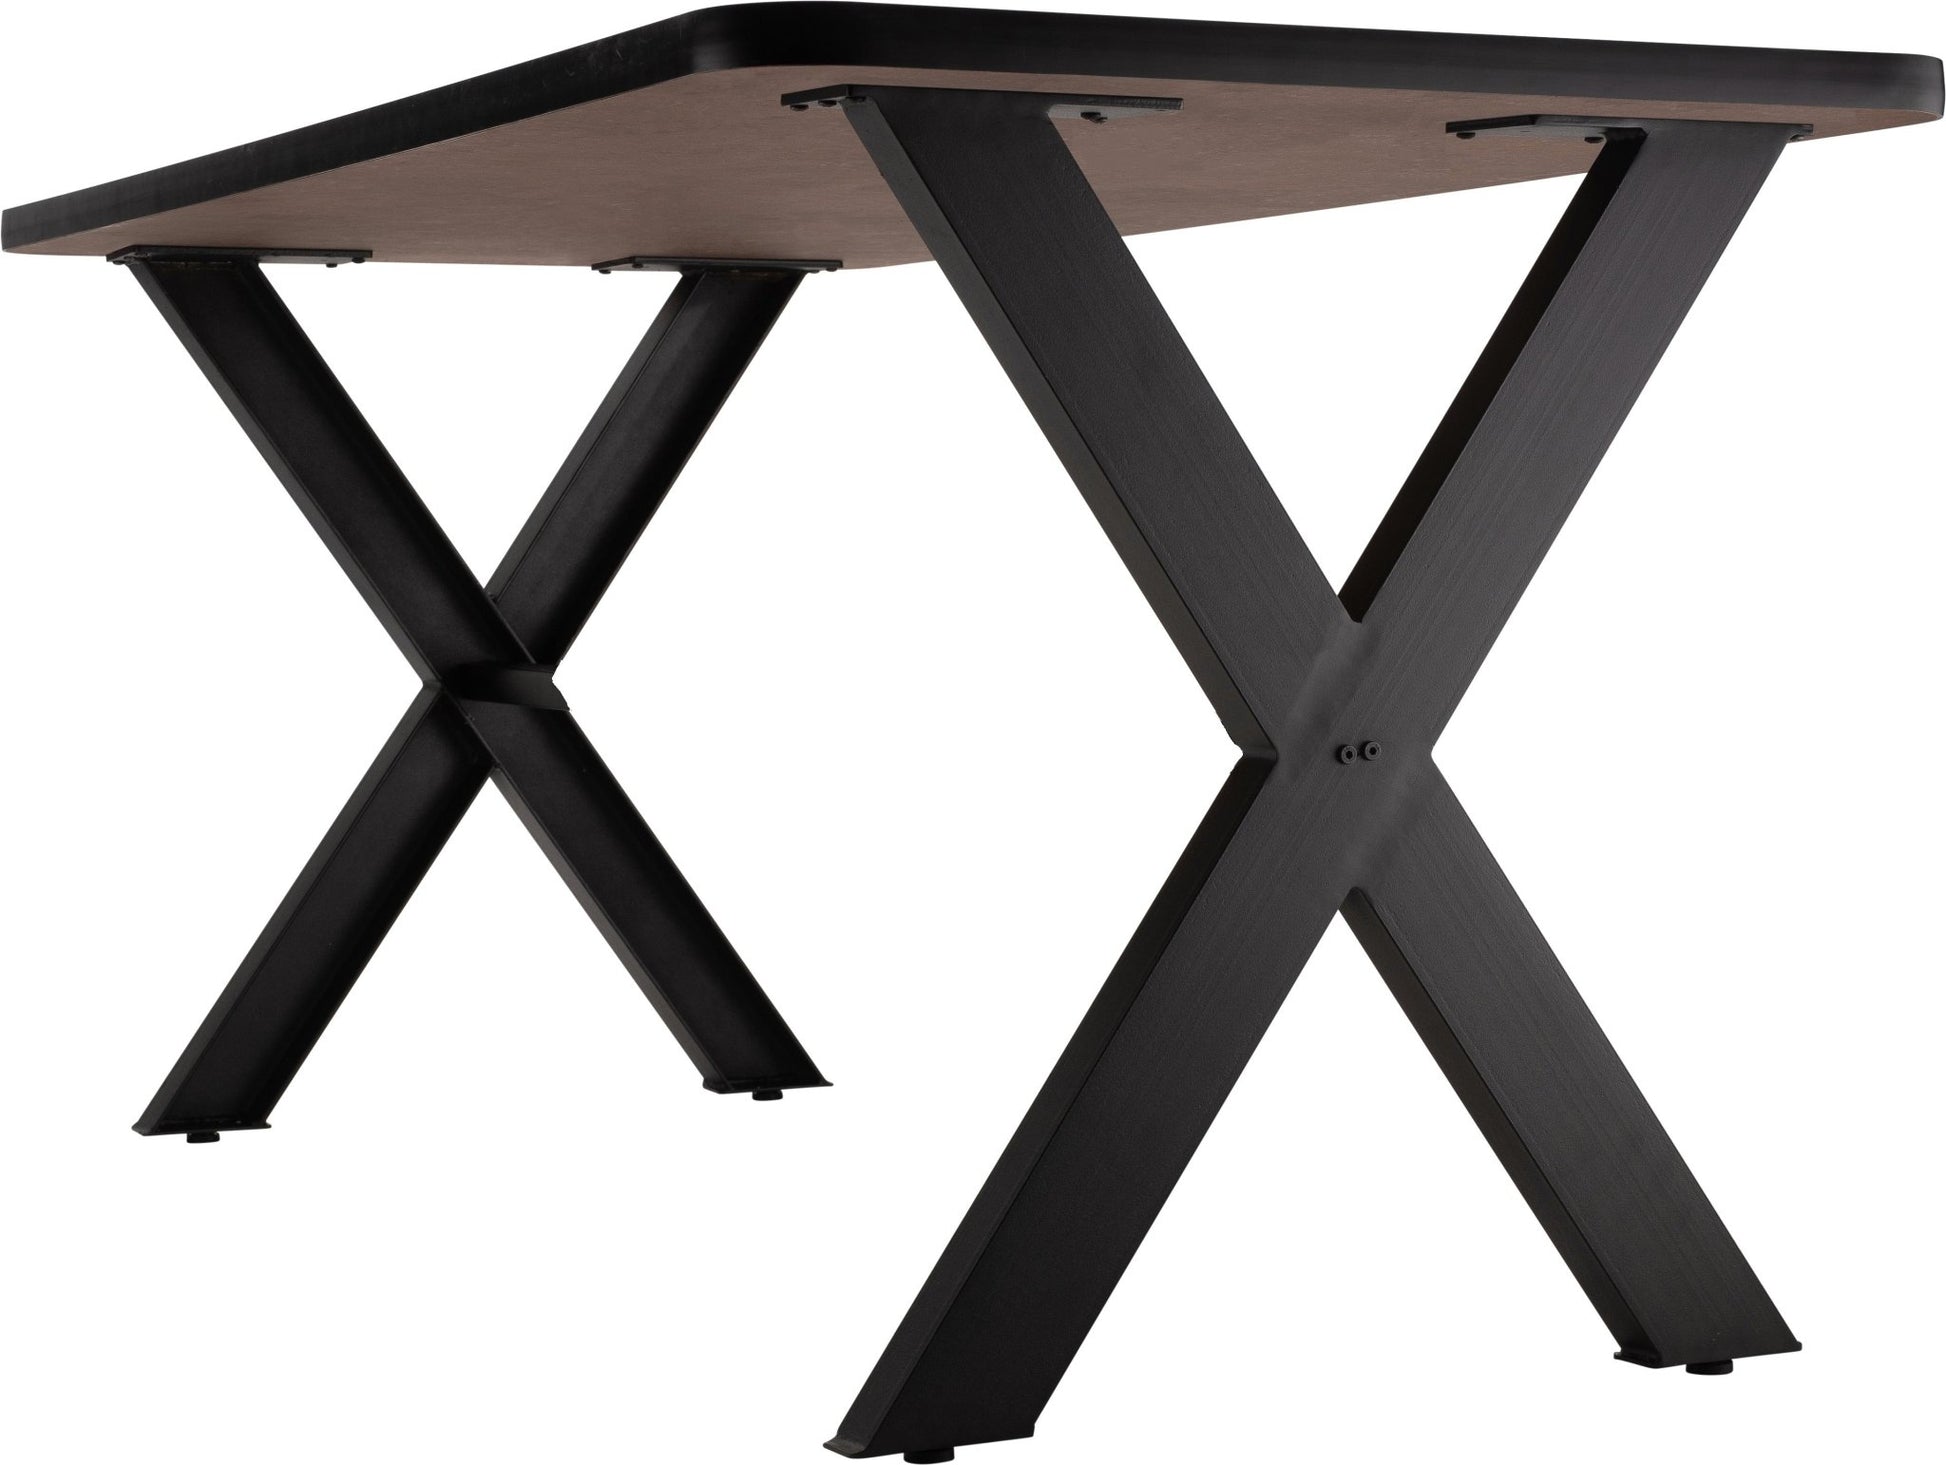 NPS CLT3060D2 - Collaborator Table, 30"x 60" Rectangle, 30" Height w/ Crossbeam, High Pressure Laminate Top (National Public Seating NPS-CLT3060D2) - SchoolOutlet